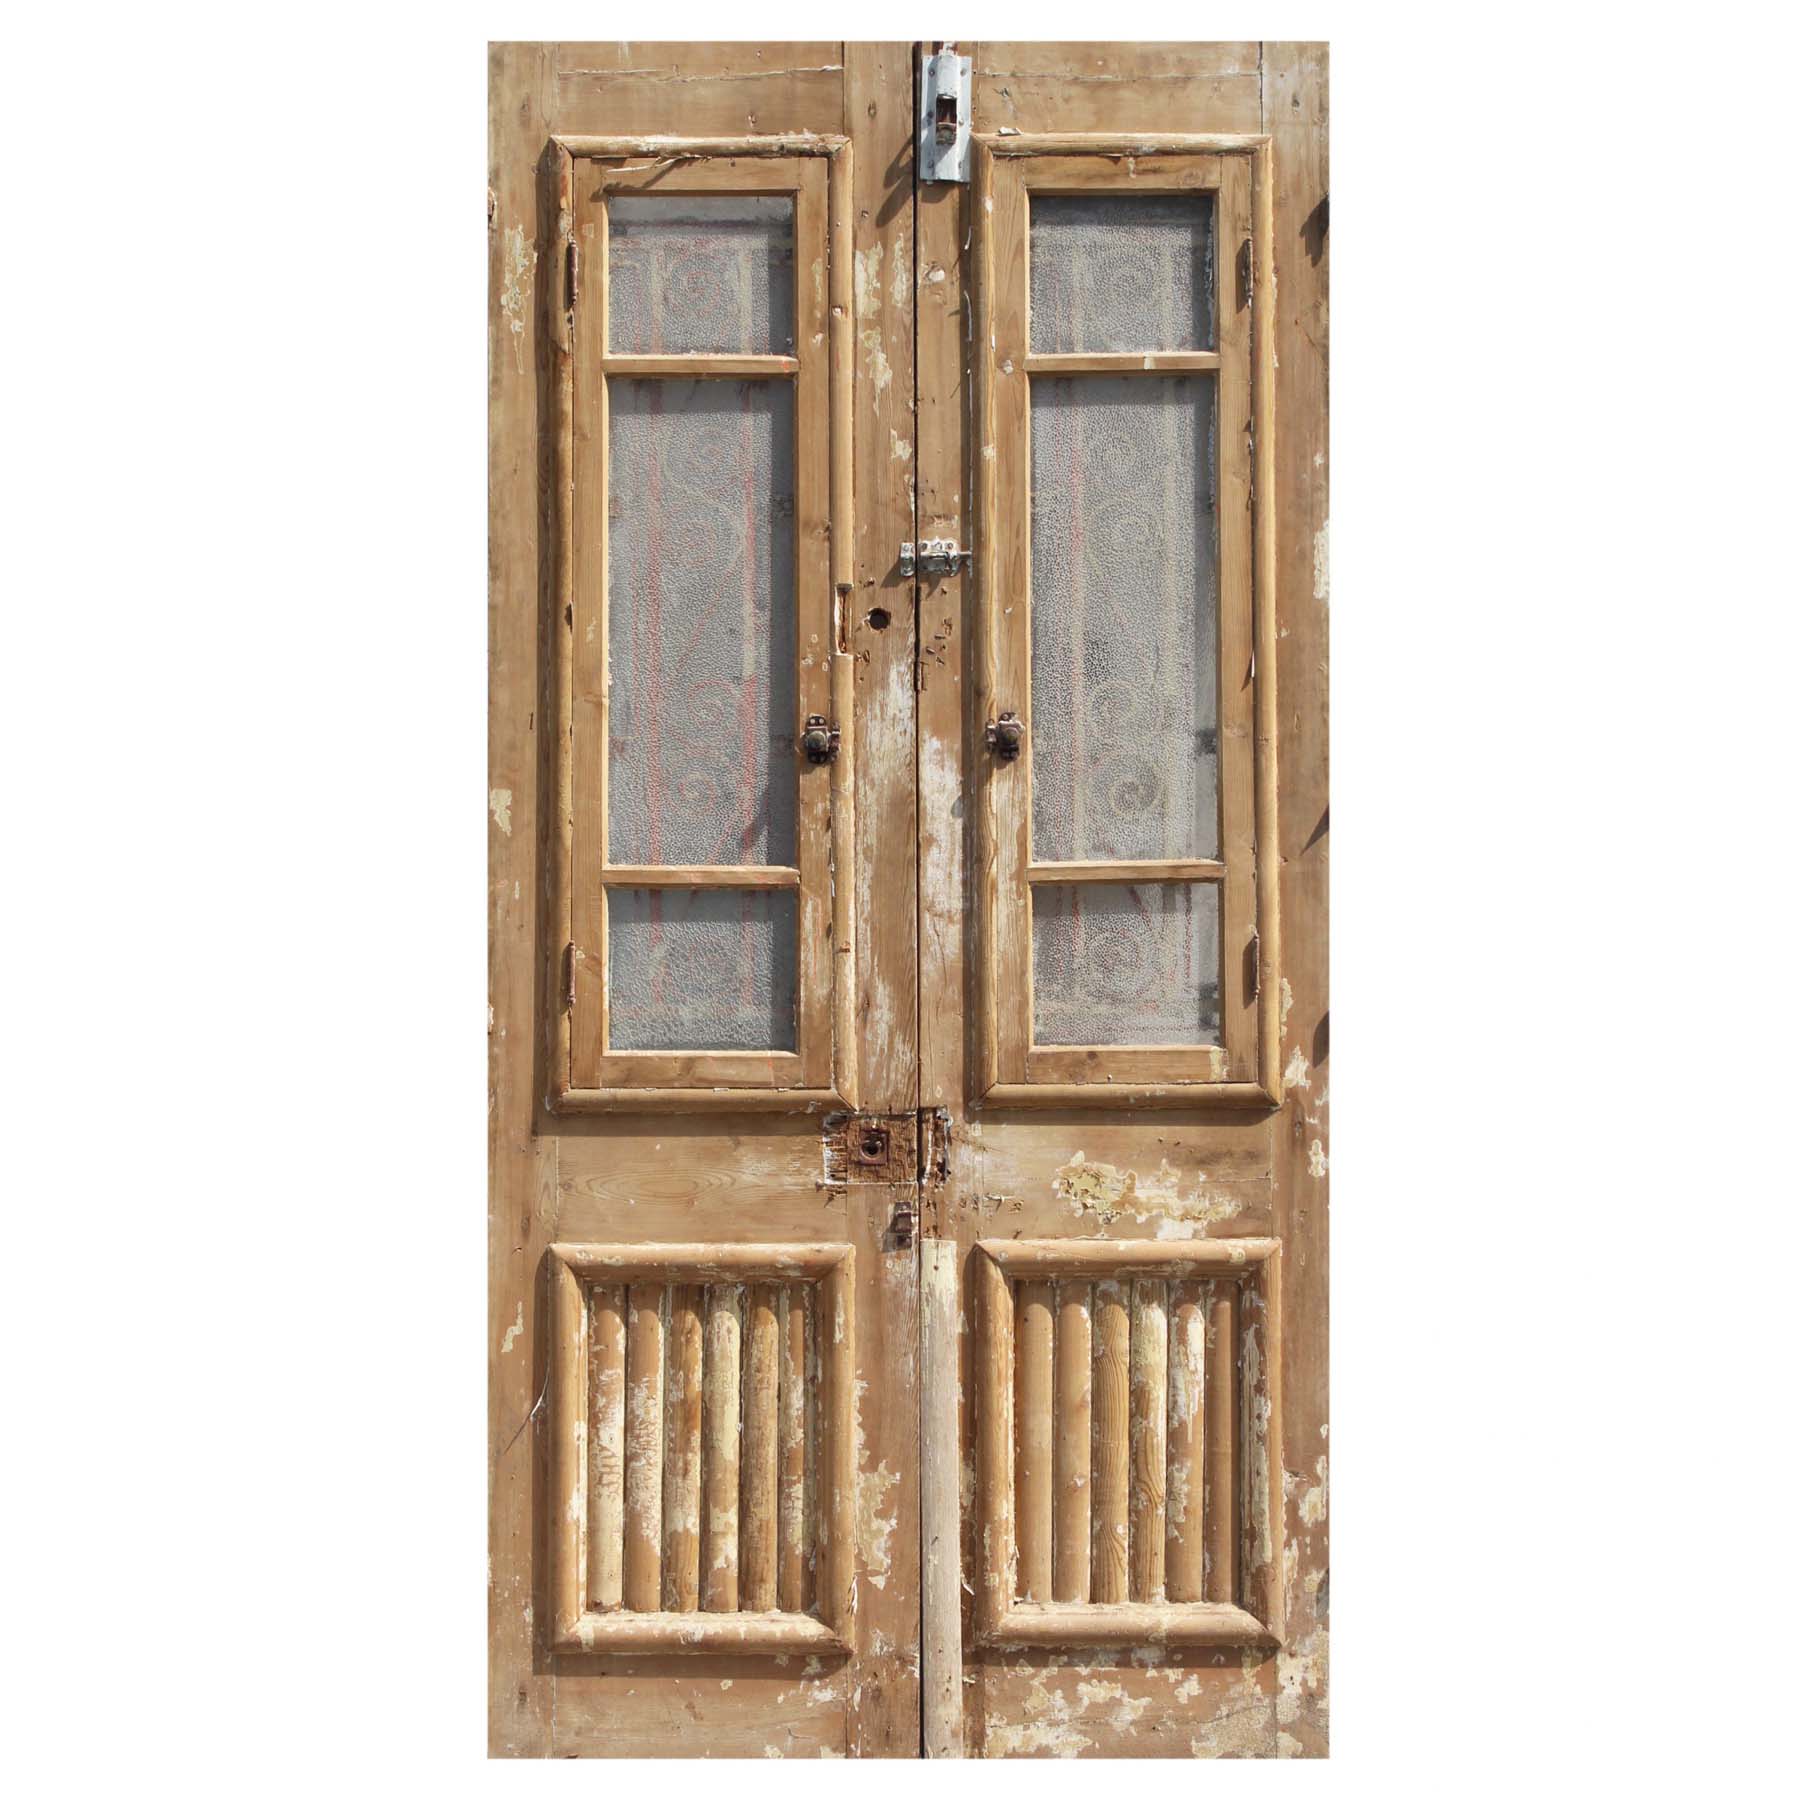 SOLD Pair of 44” Antique French Colonial Doors with Iron Inserts-68889